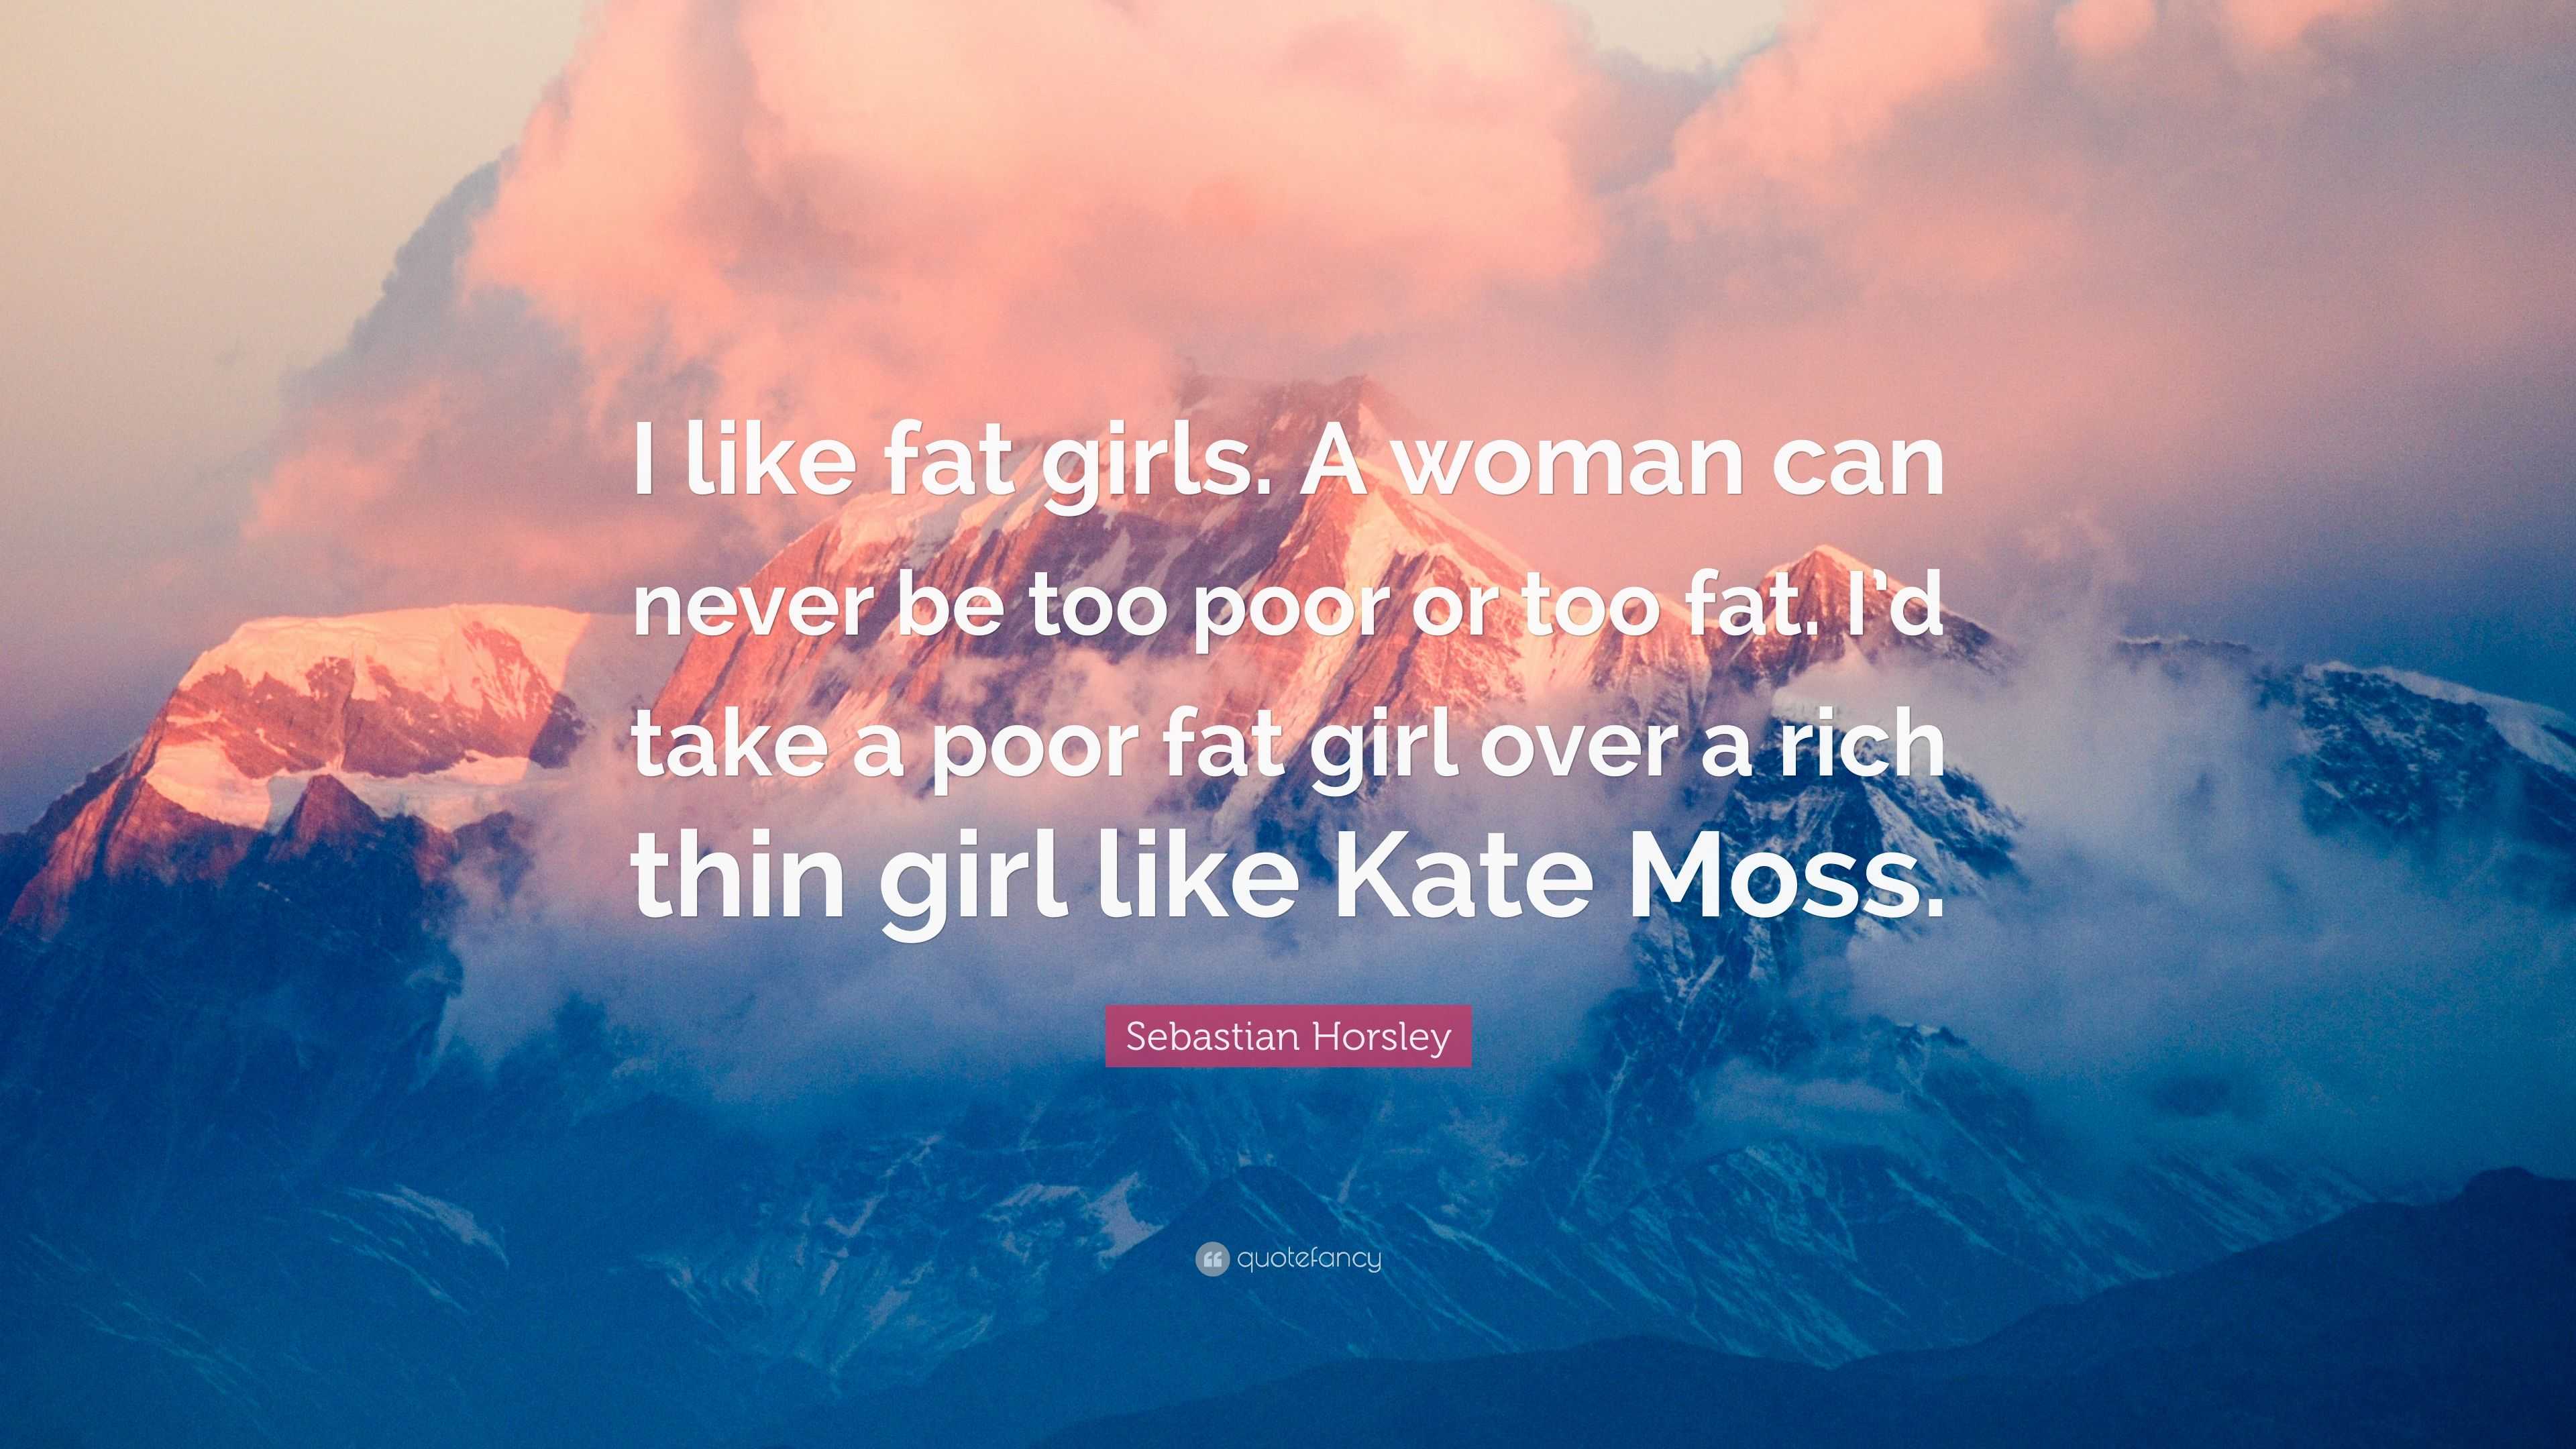 Sebastian Horsley Quote: “I like fat girls. A woman can never be too ...